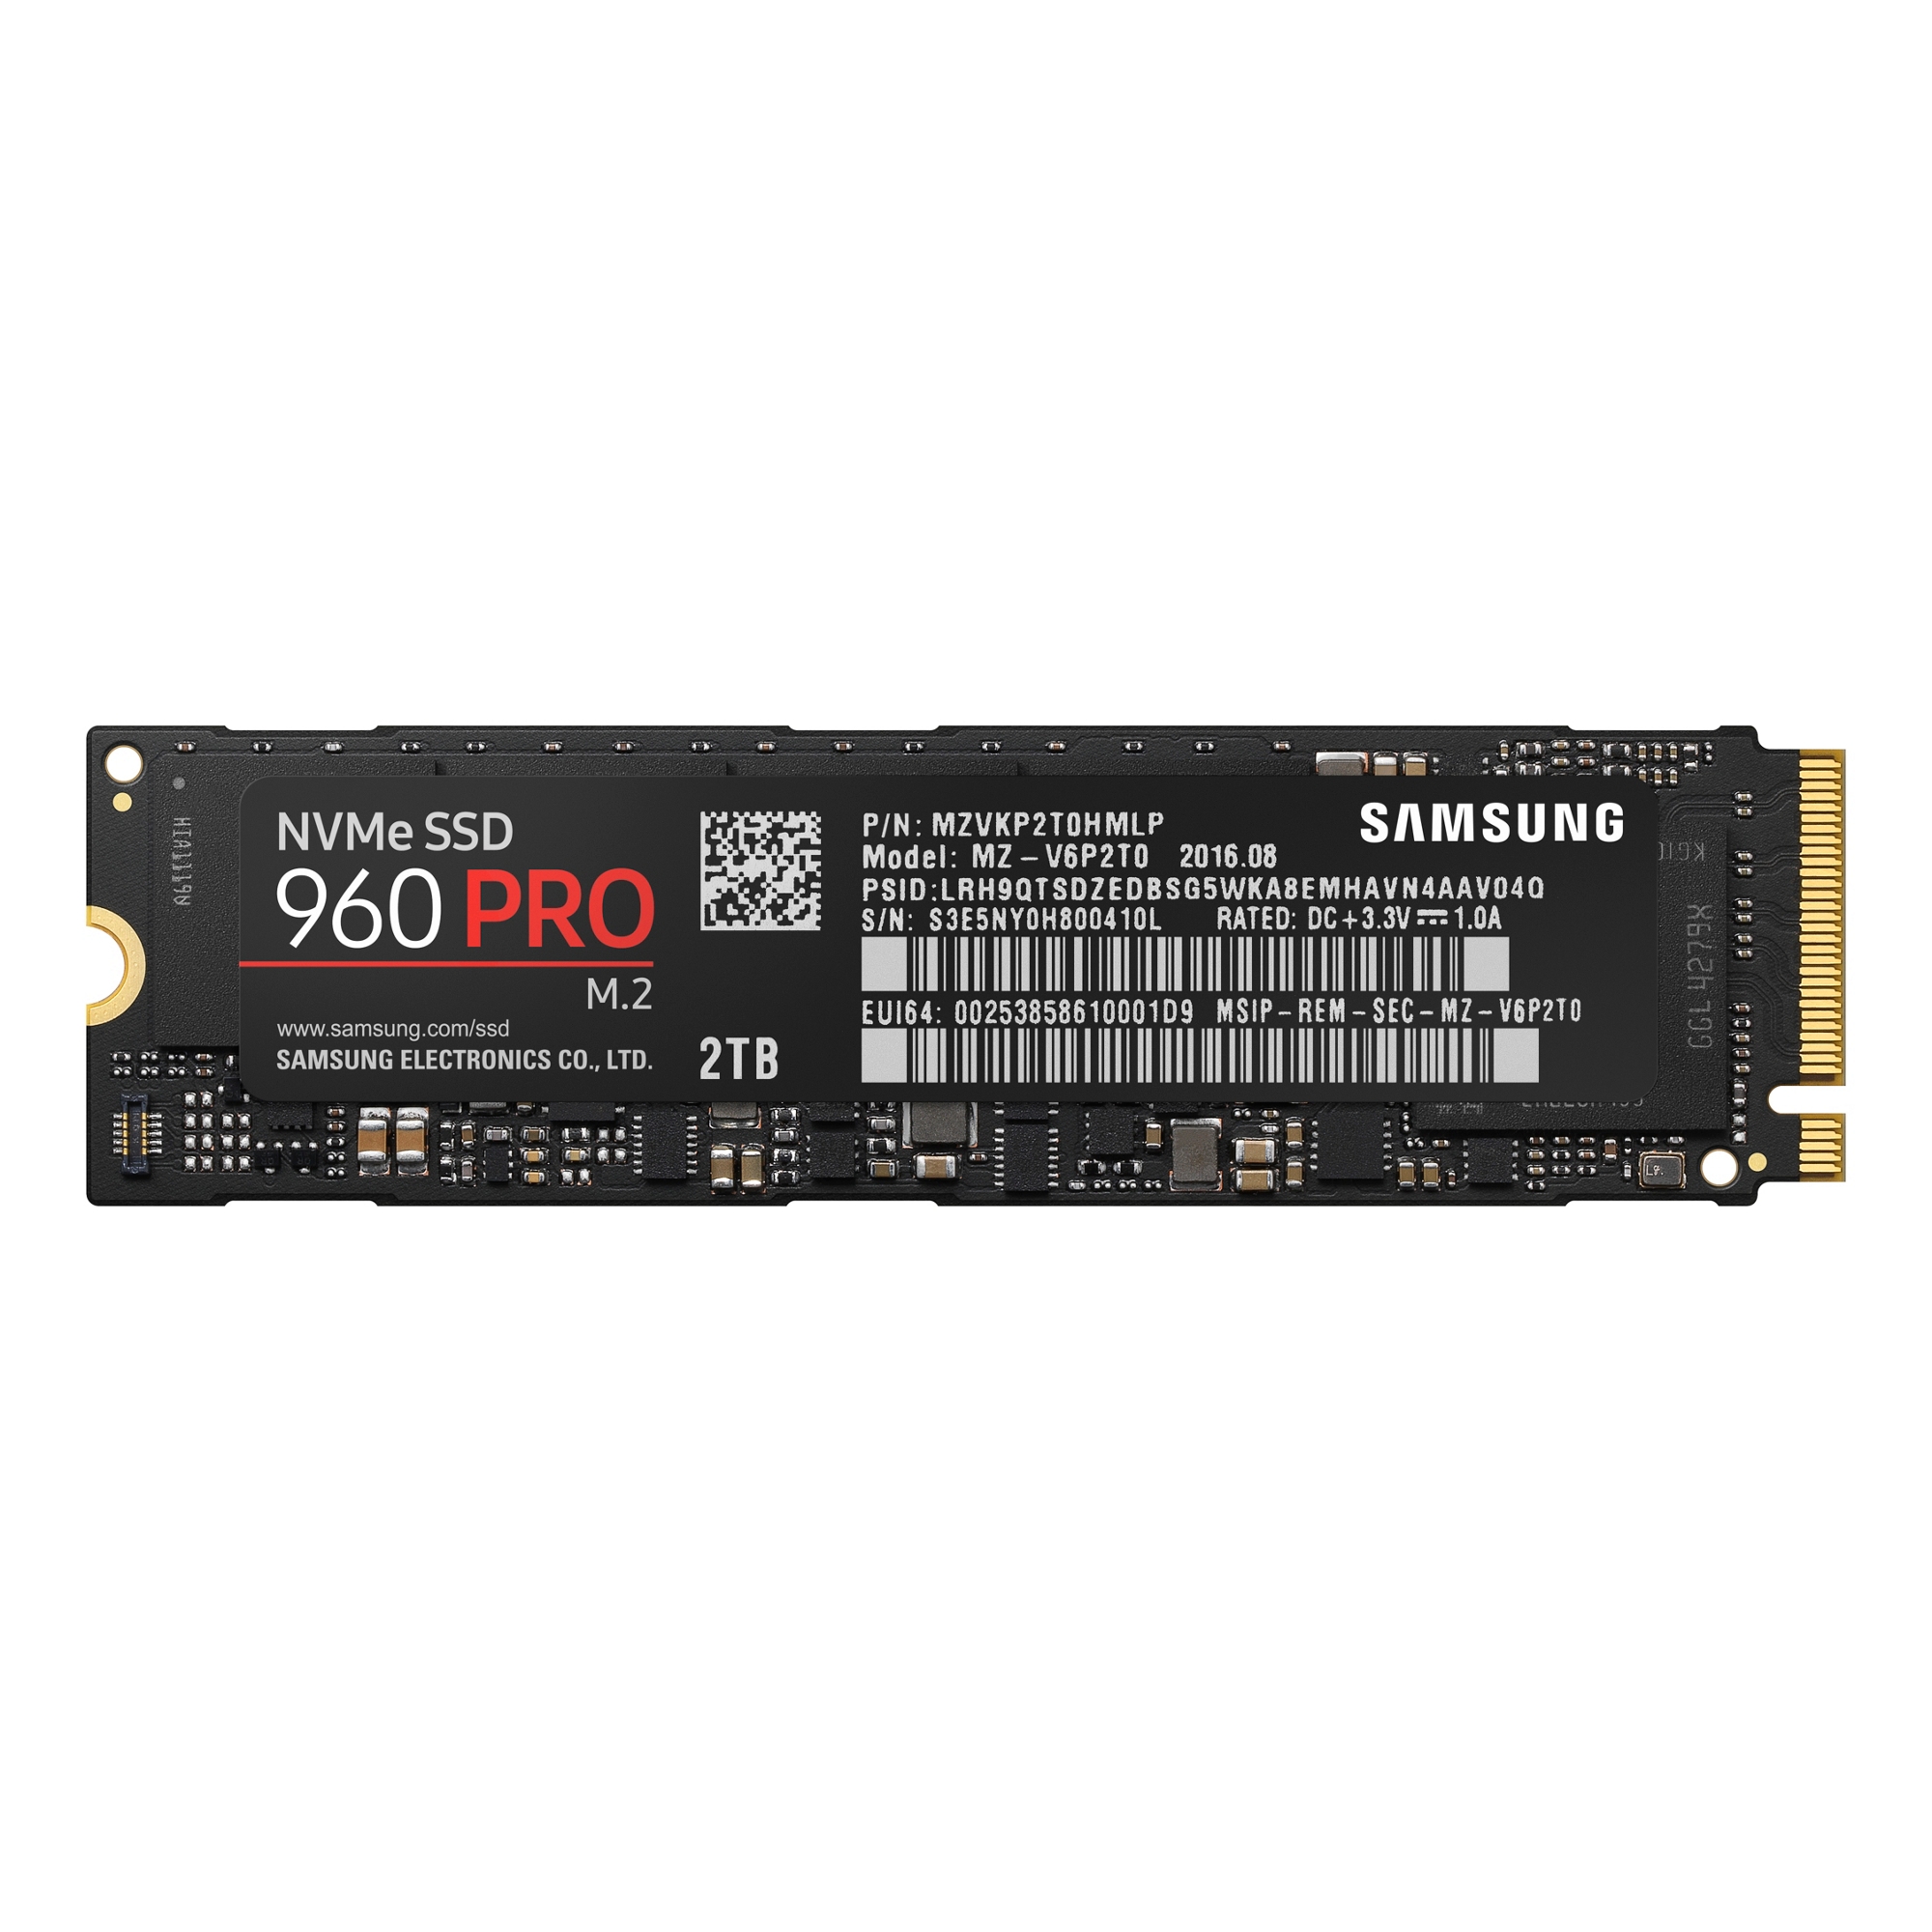 Buy SSD 970 EVO Plus NVMe M.2 2TB, PC Solid State Drive